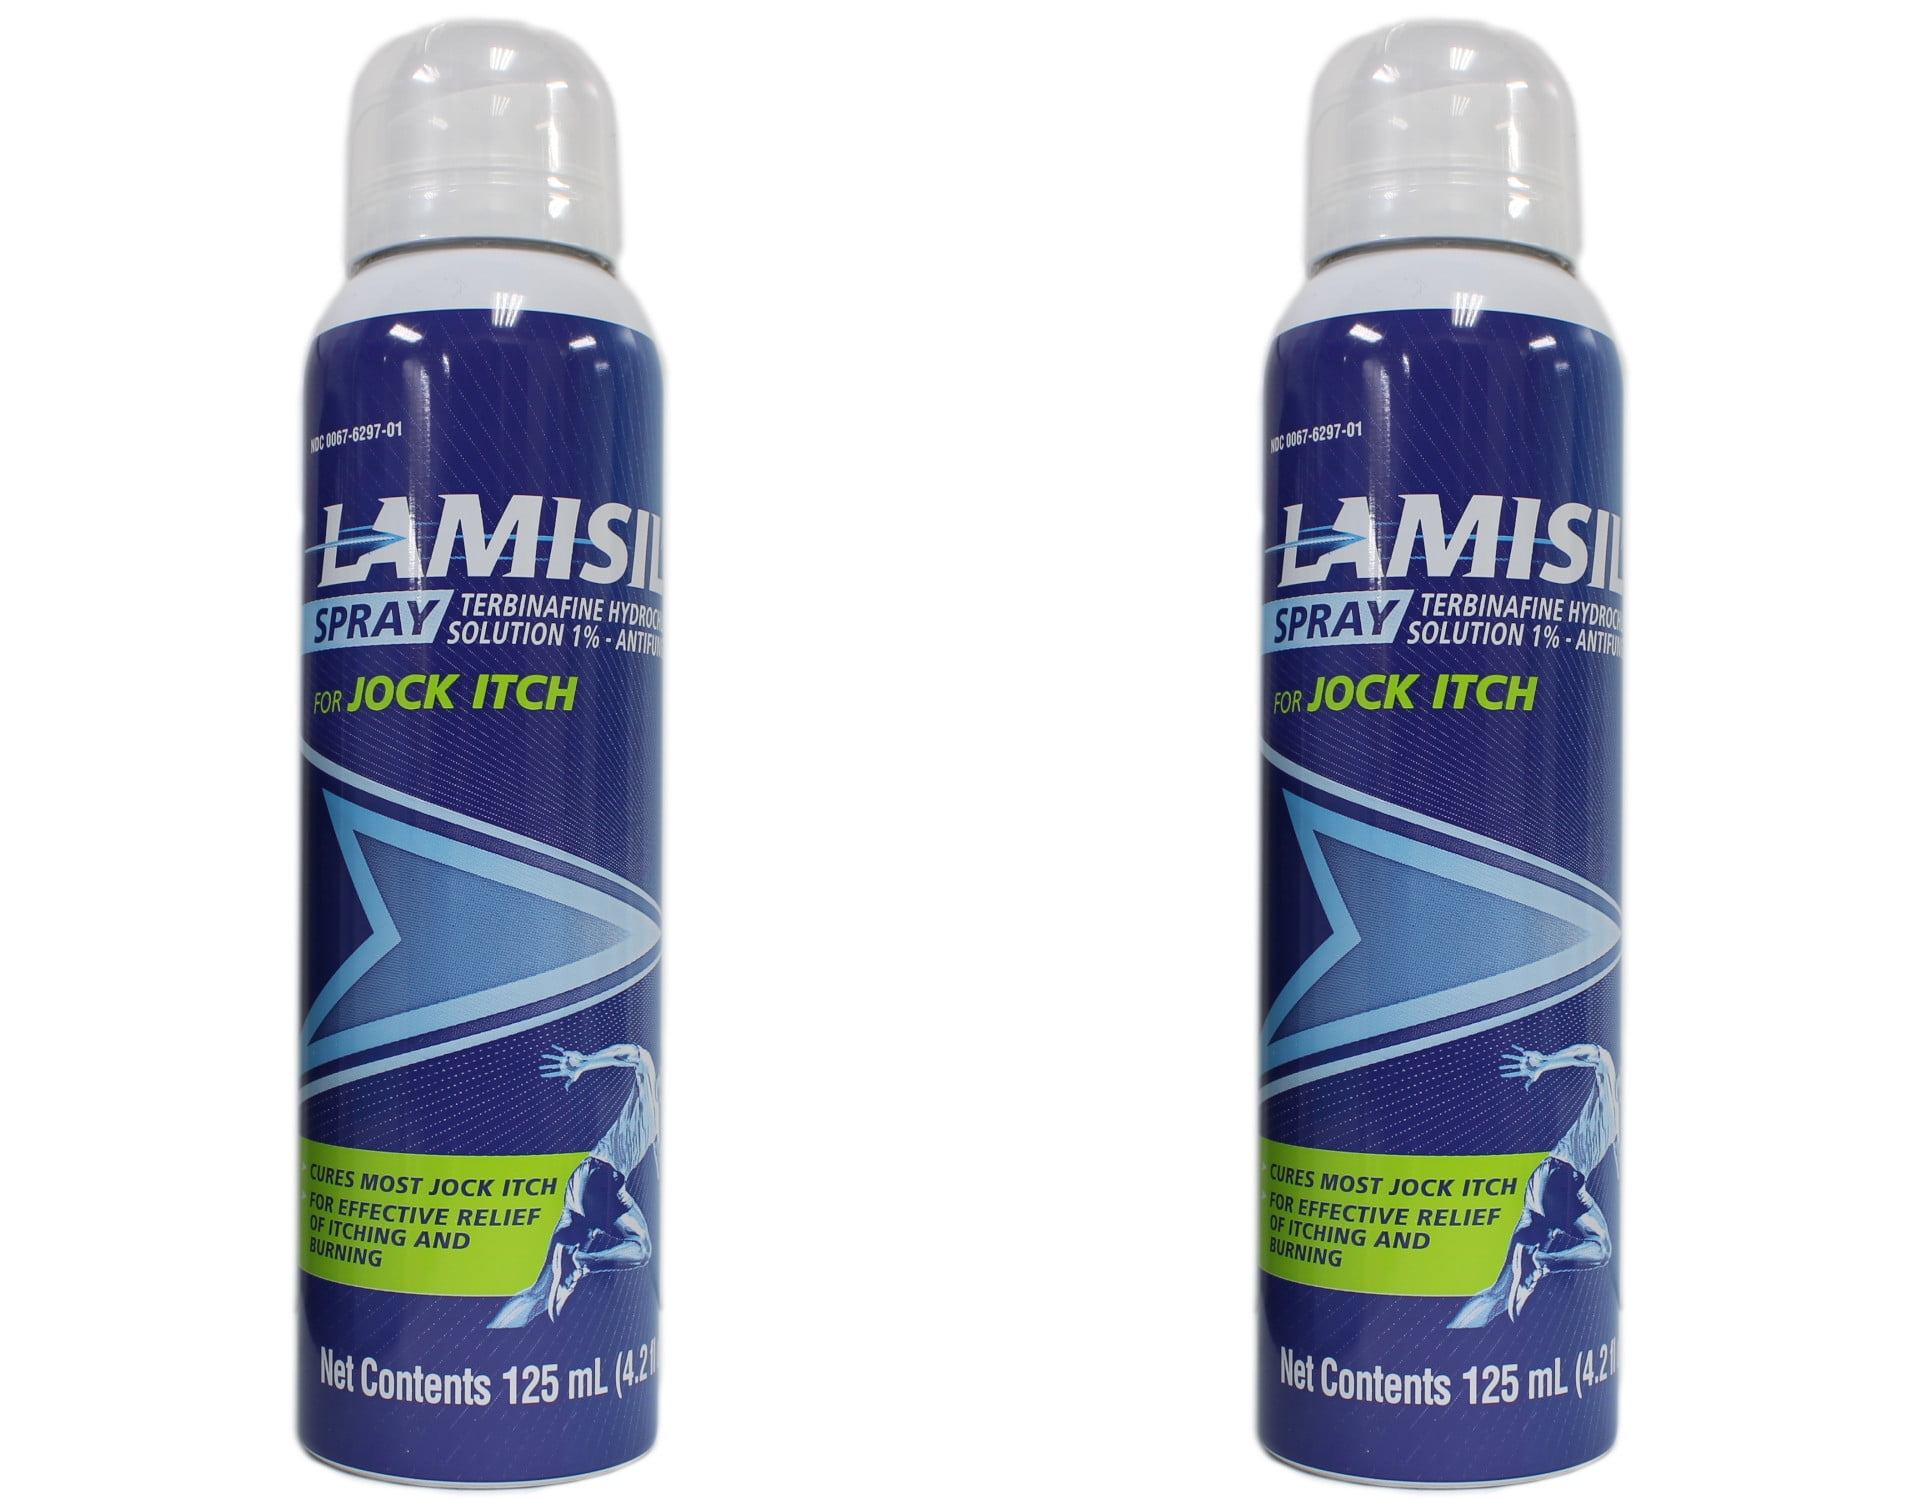 lamisil jock itch spray boots